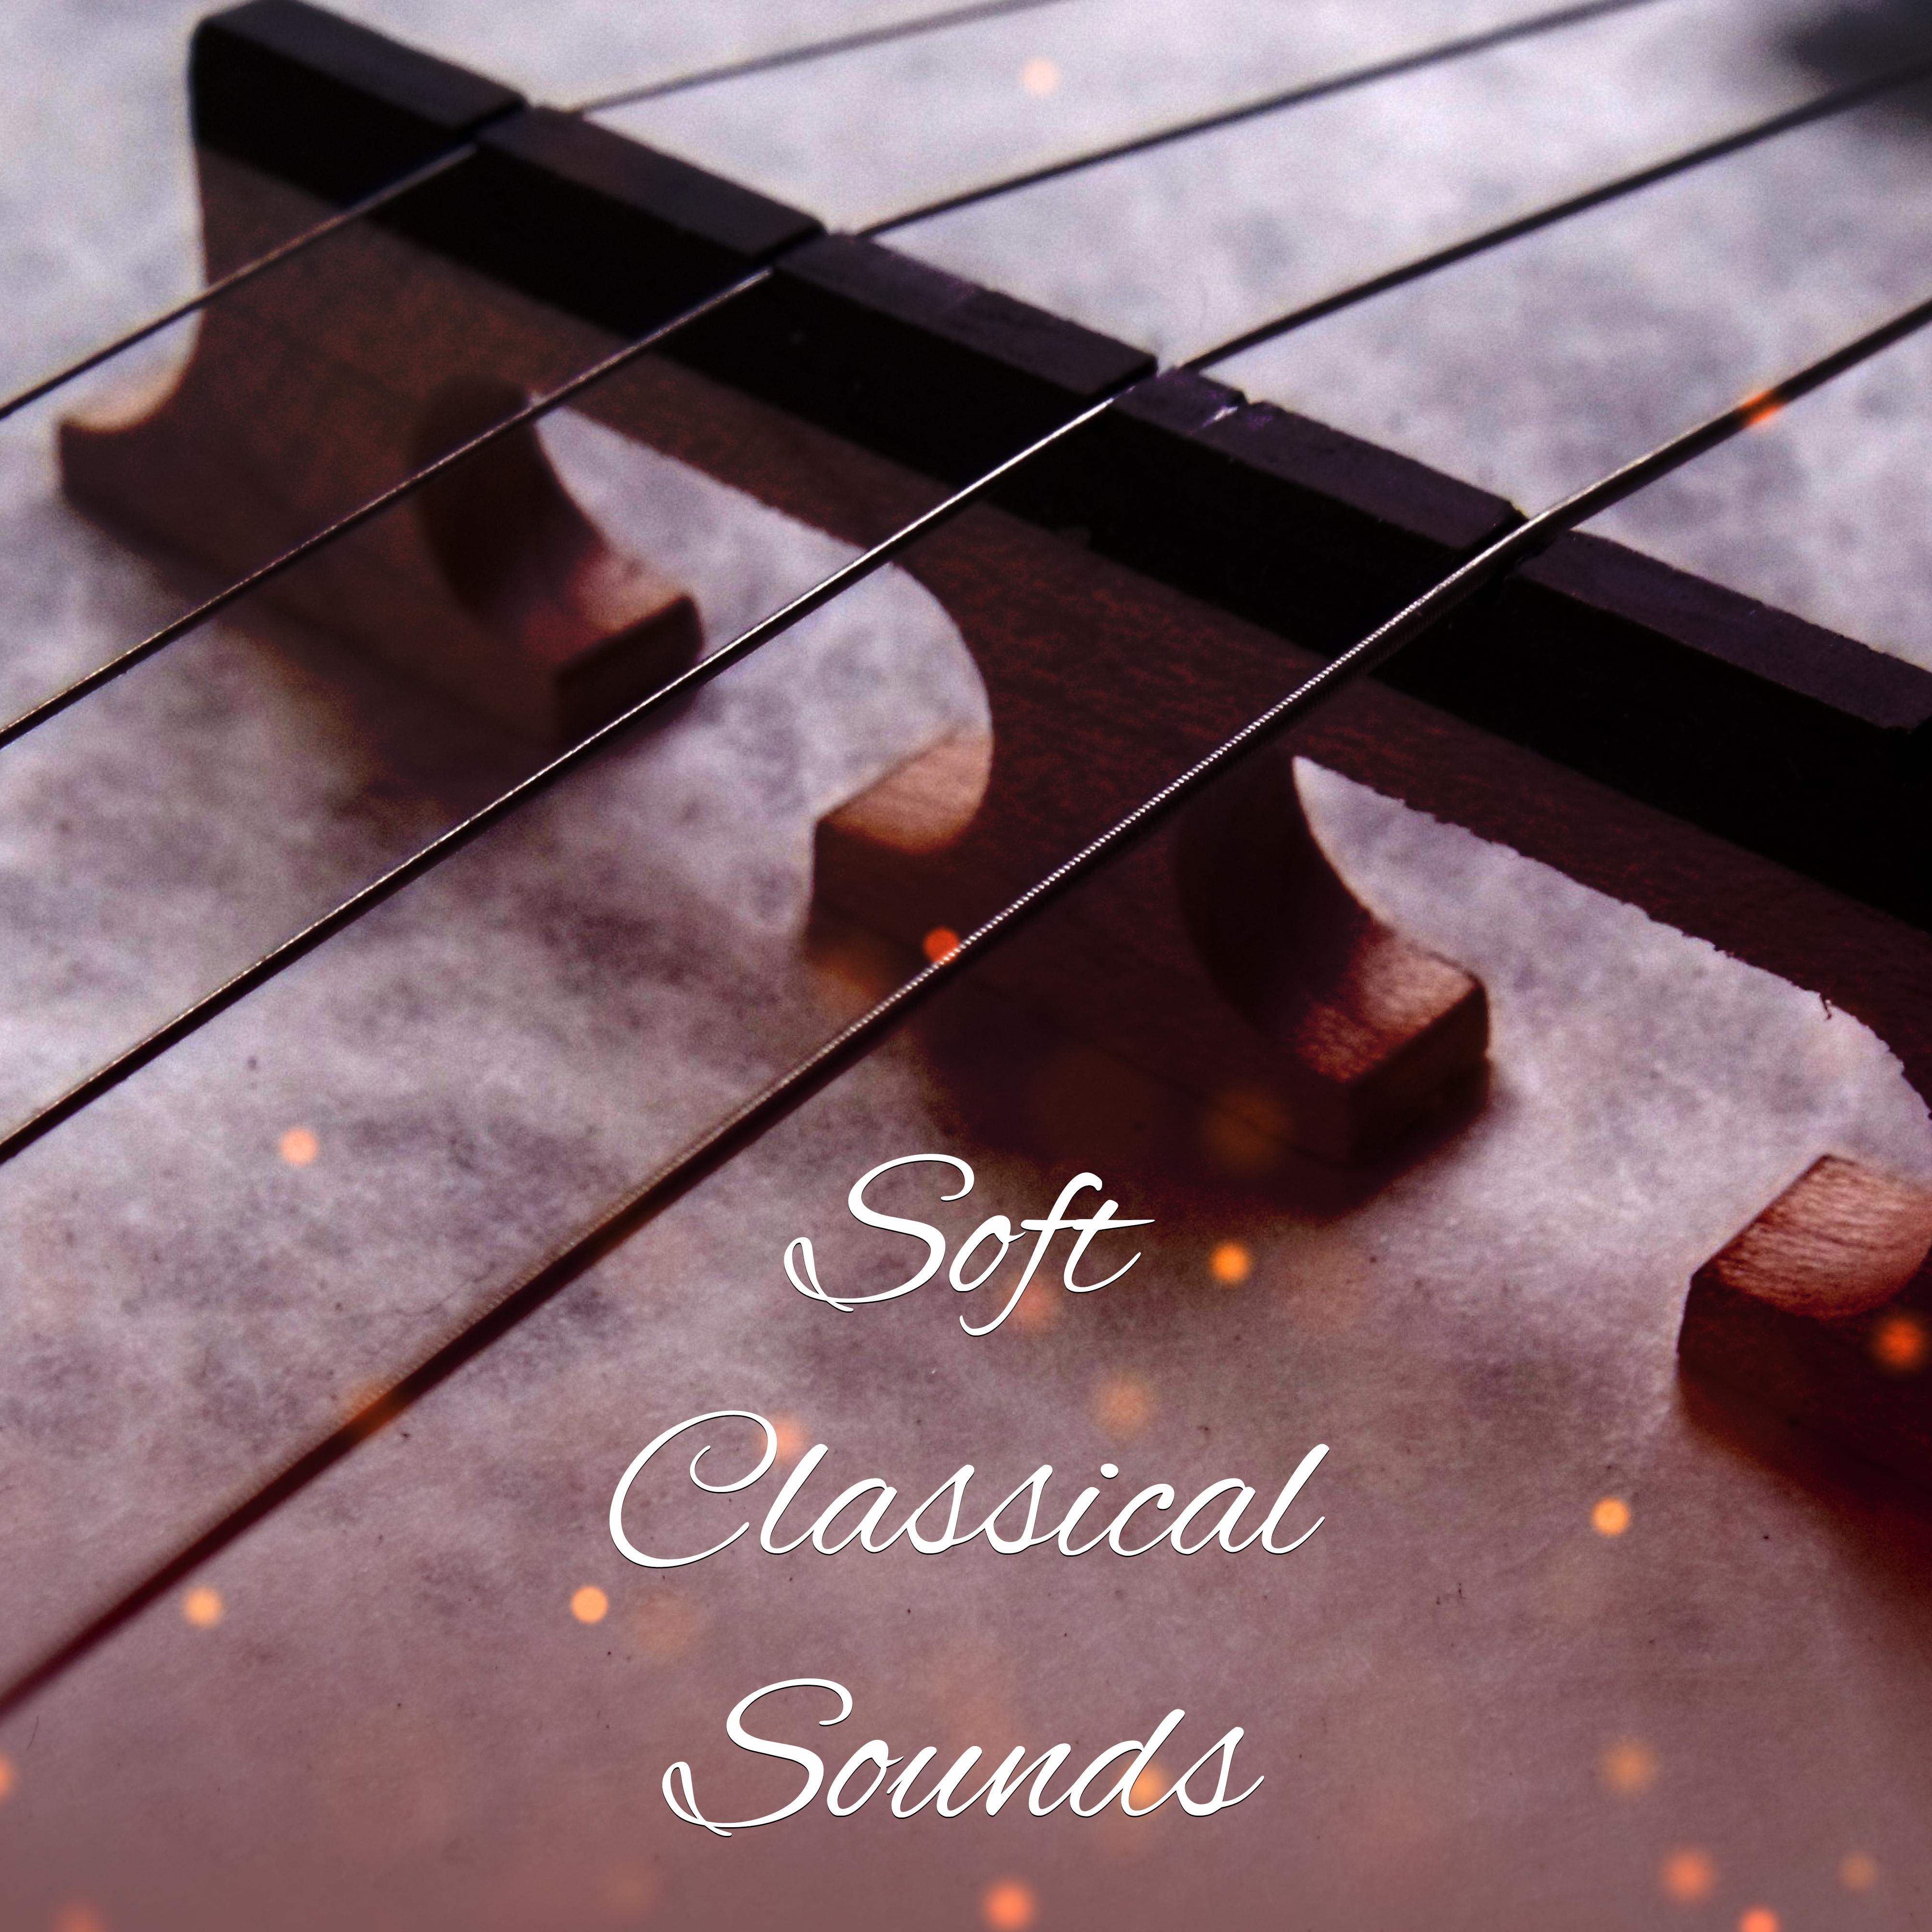 Soft Classical Sounds – Relaxing Classical Music, Rest with Classics, Sounds to Calm Mind